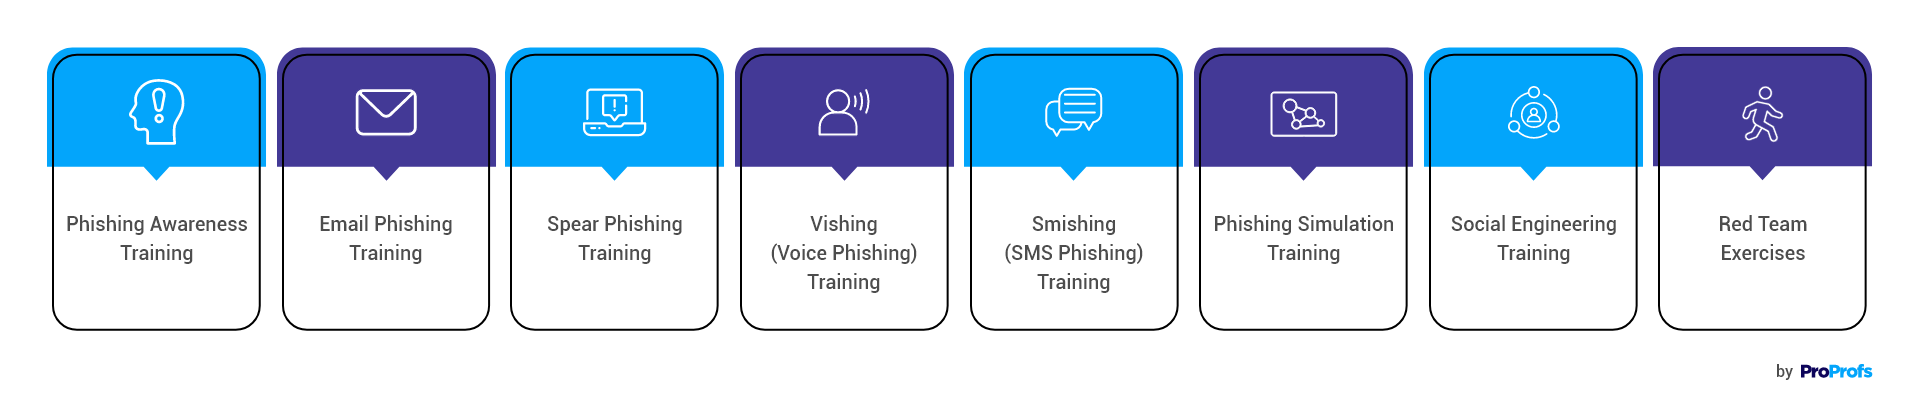 Top 8 Phishing Training Examples and Types